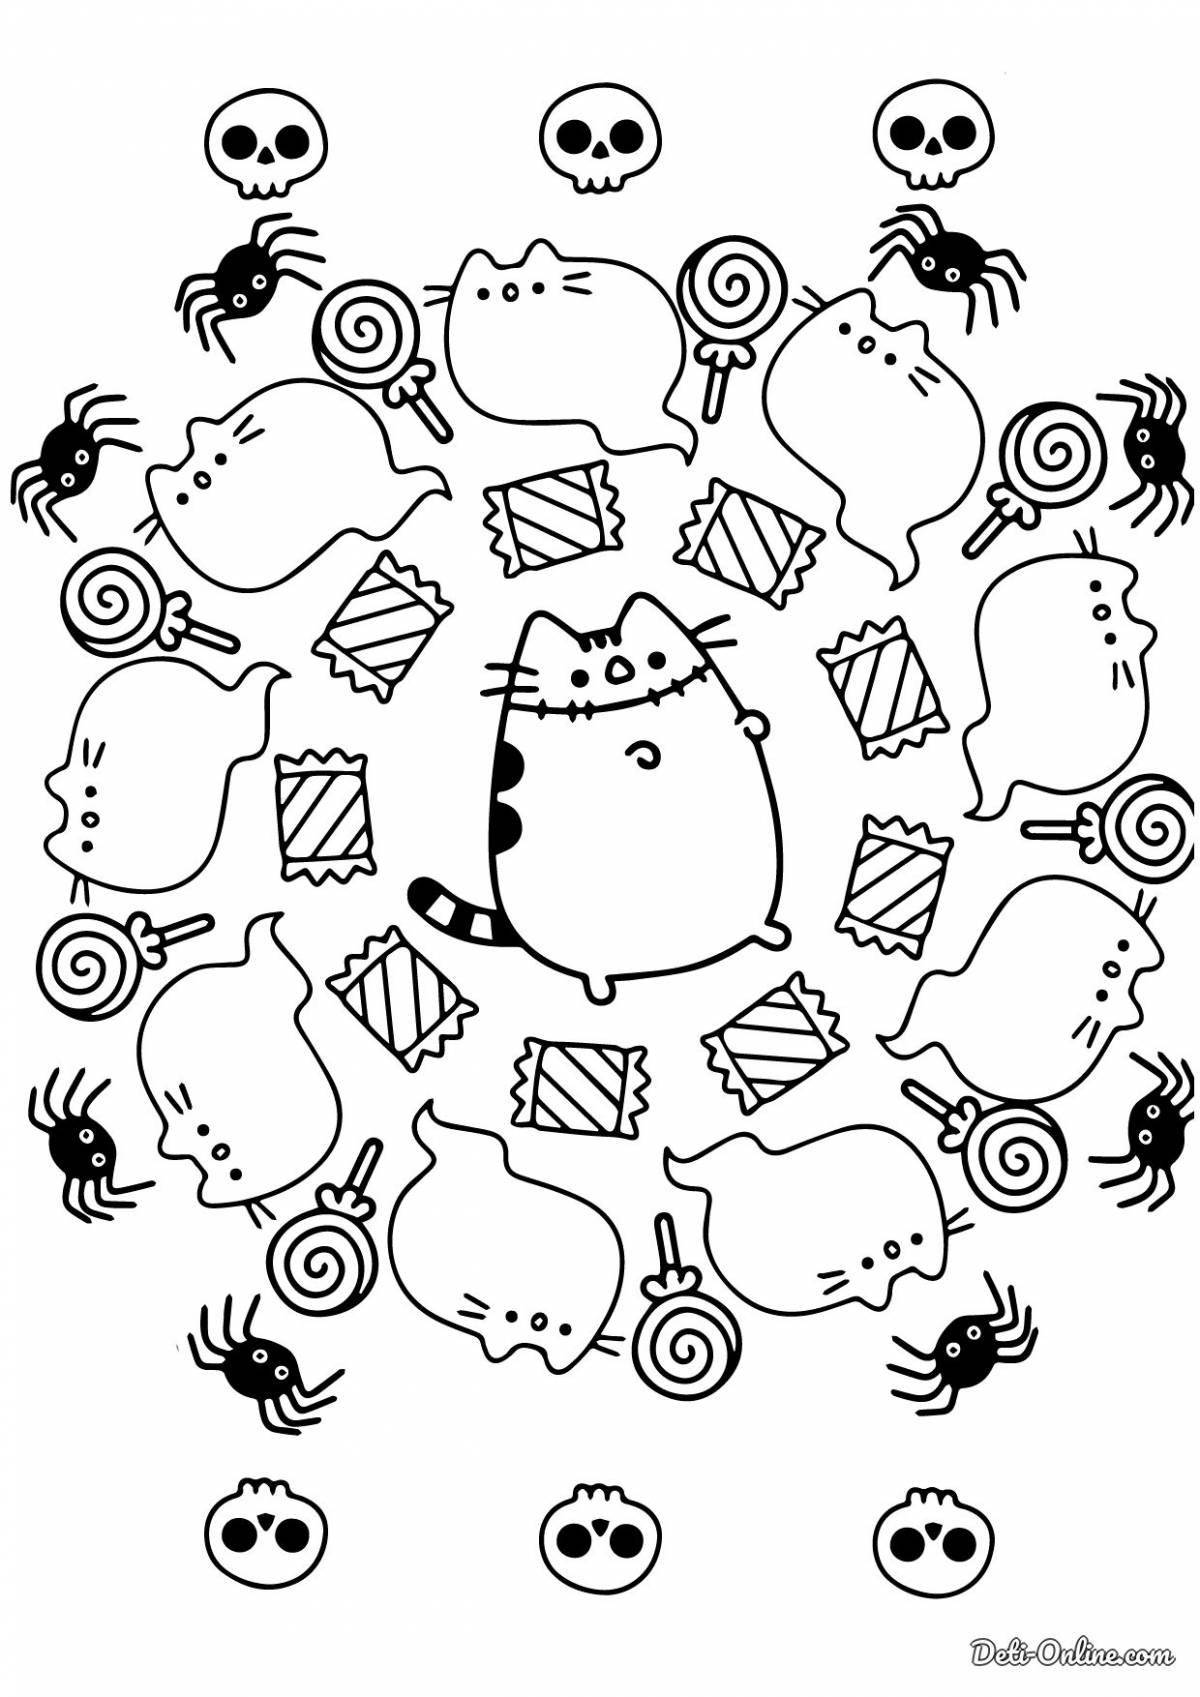 Colourful coloring page for pusheen kids